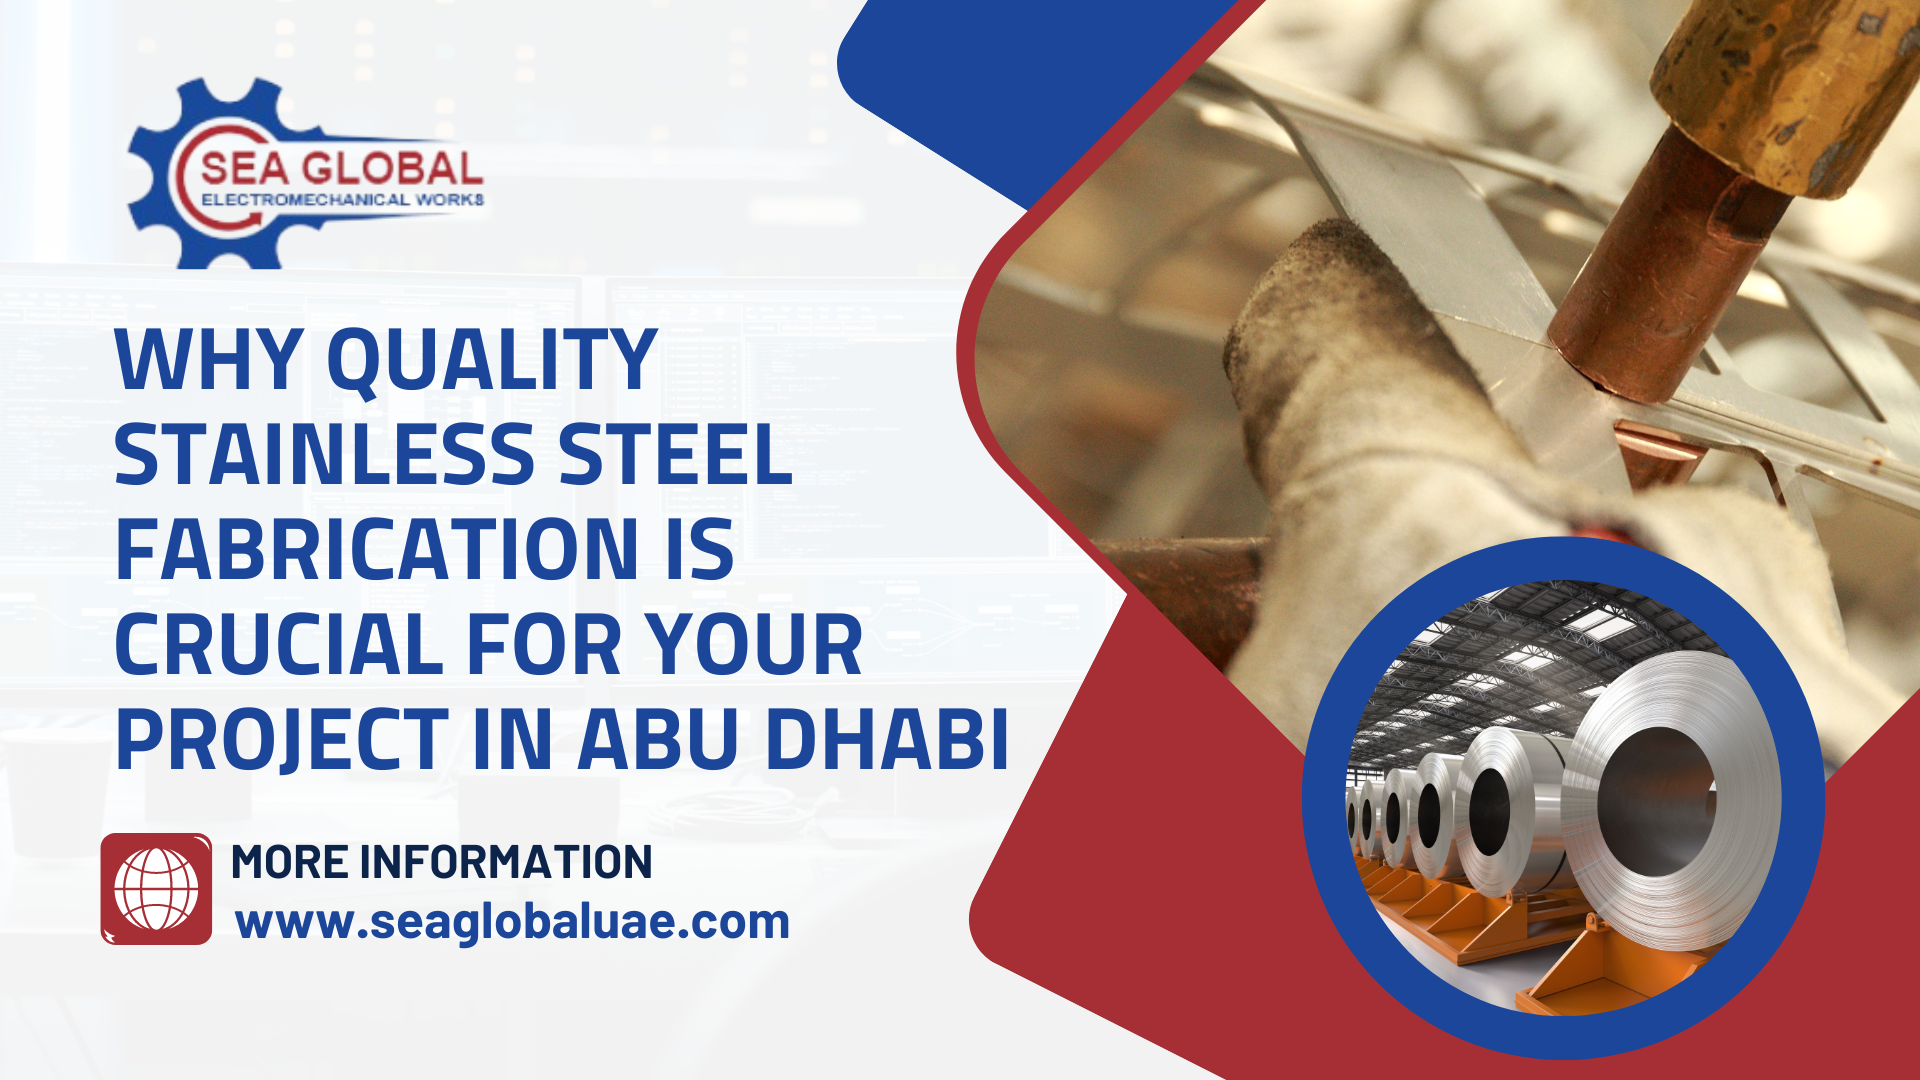 Why Quality Stainless Steel Fabrication is Crucial for Your Project in Abu Dhabi